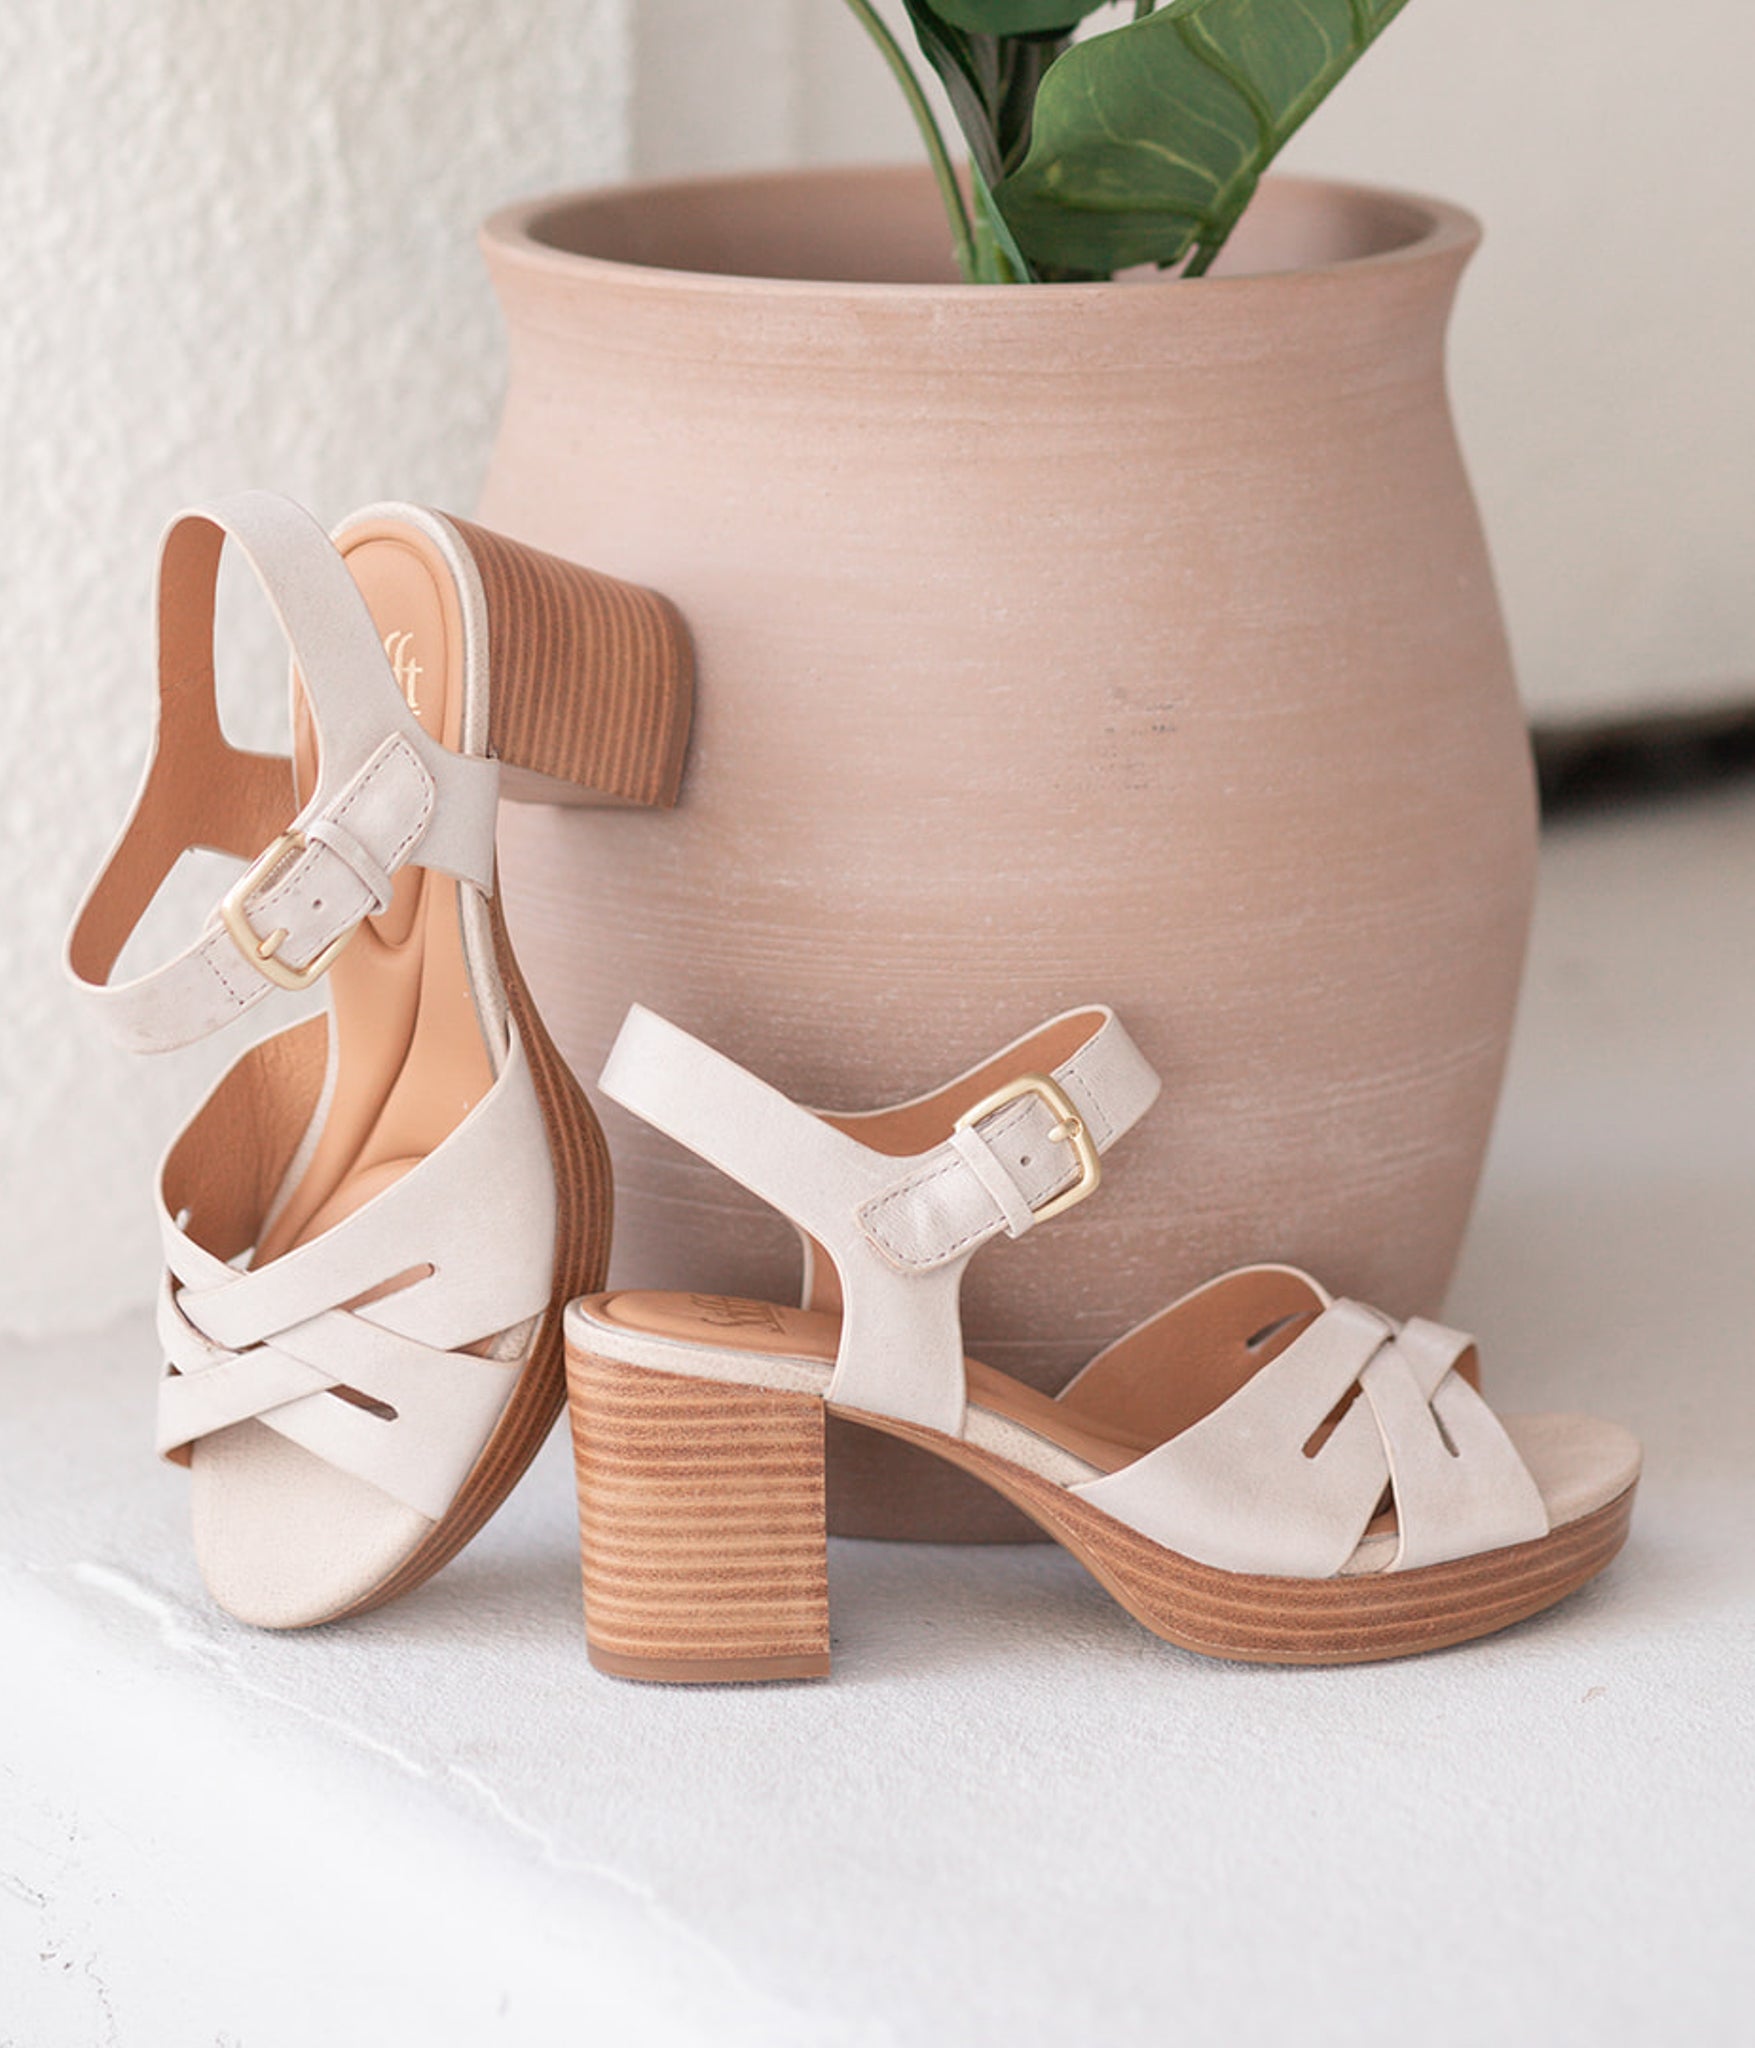 Lacie Italian Leather Heeled Platform Sandal in Tapioca Grey by Sofft Shoes